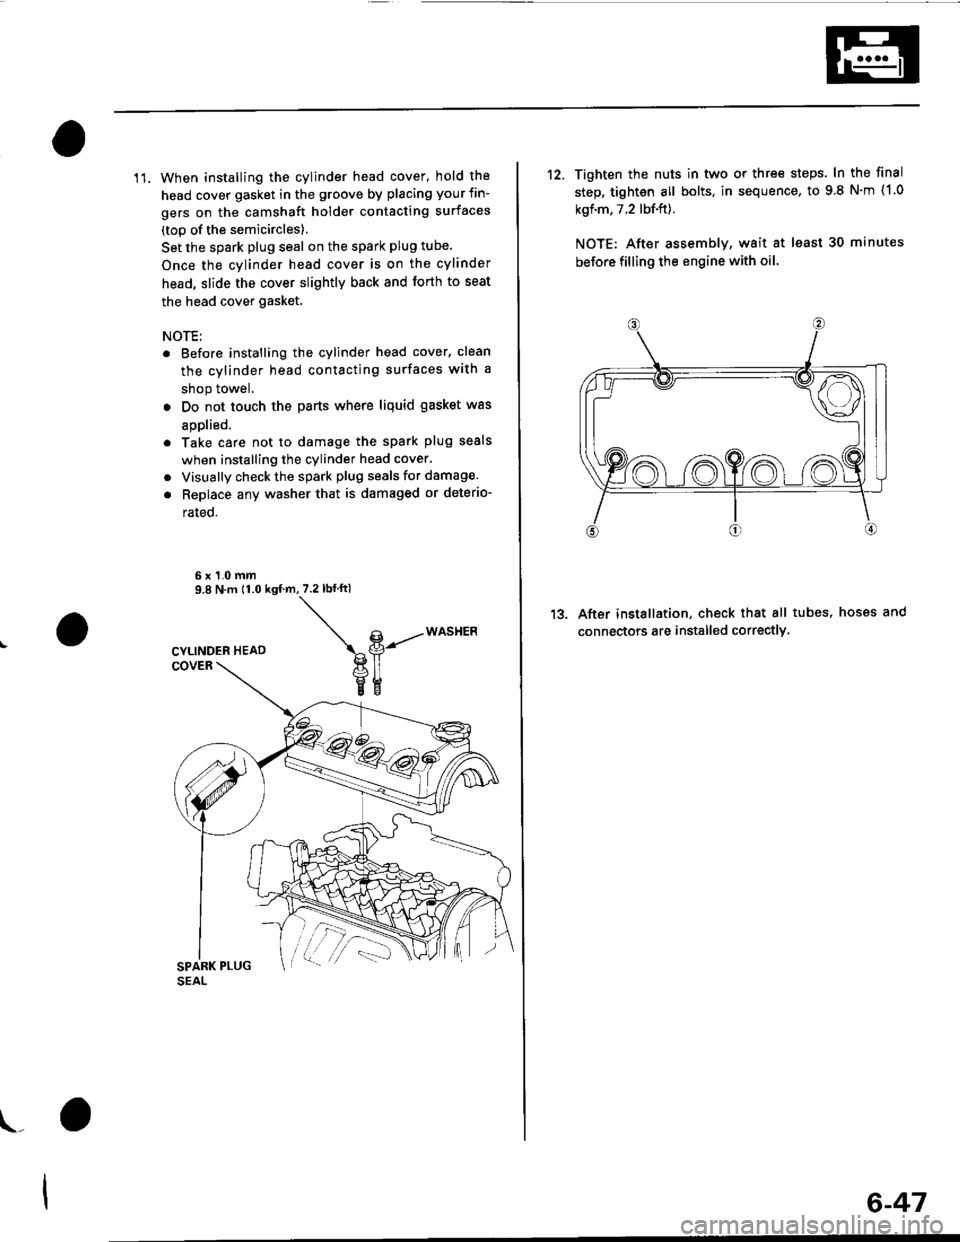 HONDA CIVIC 1996 6.G Owners Guide 11. When installing the cylinder head cover, hold the
head cover gasket in the groove by placing your fin-
gers on the camshaft holder contacting surfaces
(top of the semicircles)
Set the spark plug s